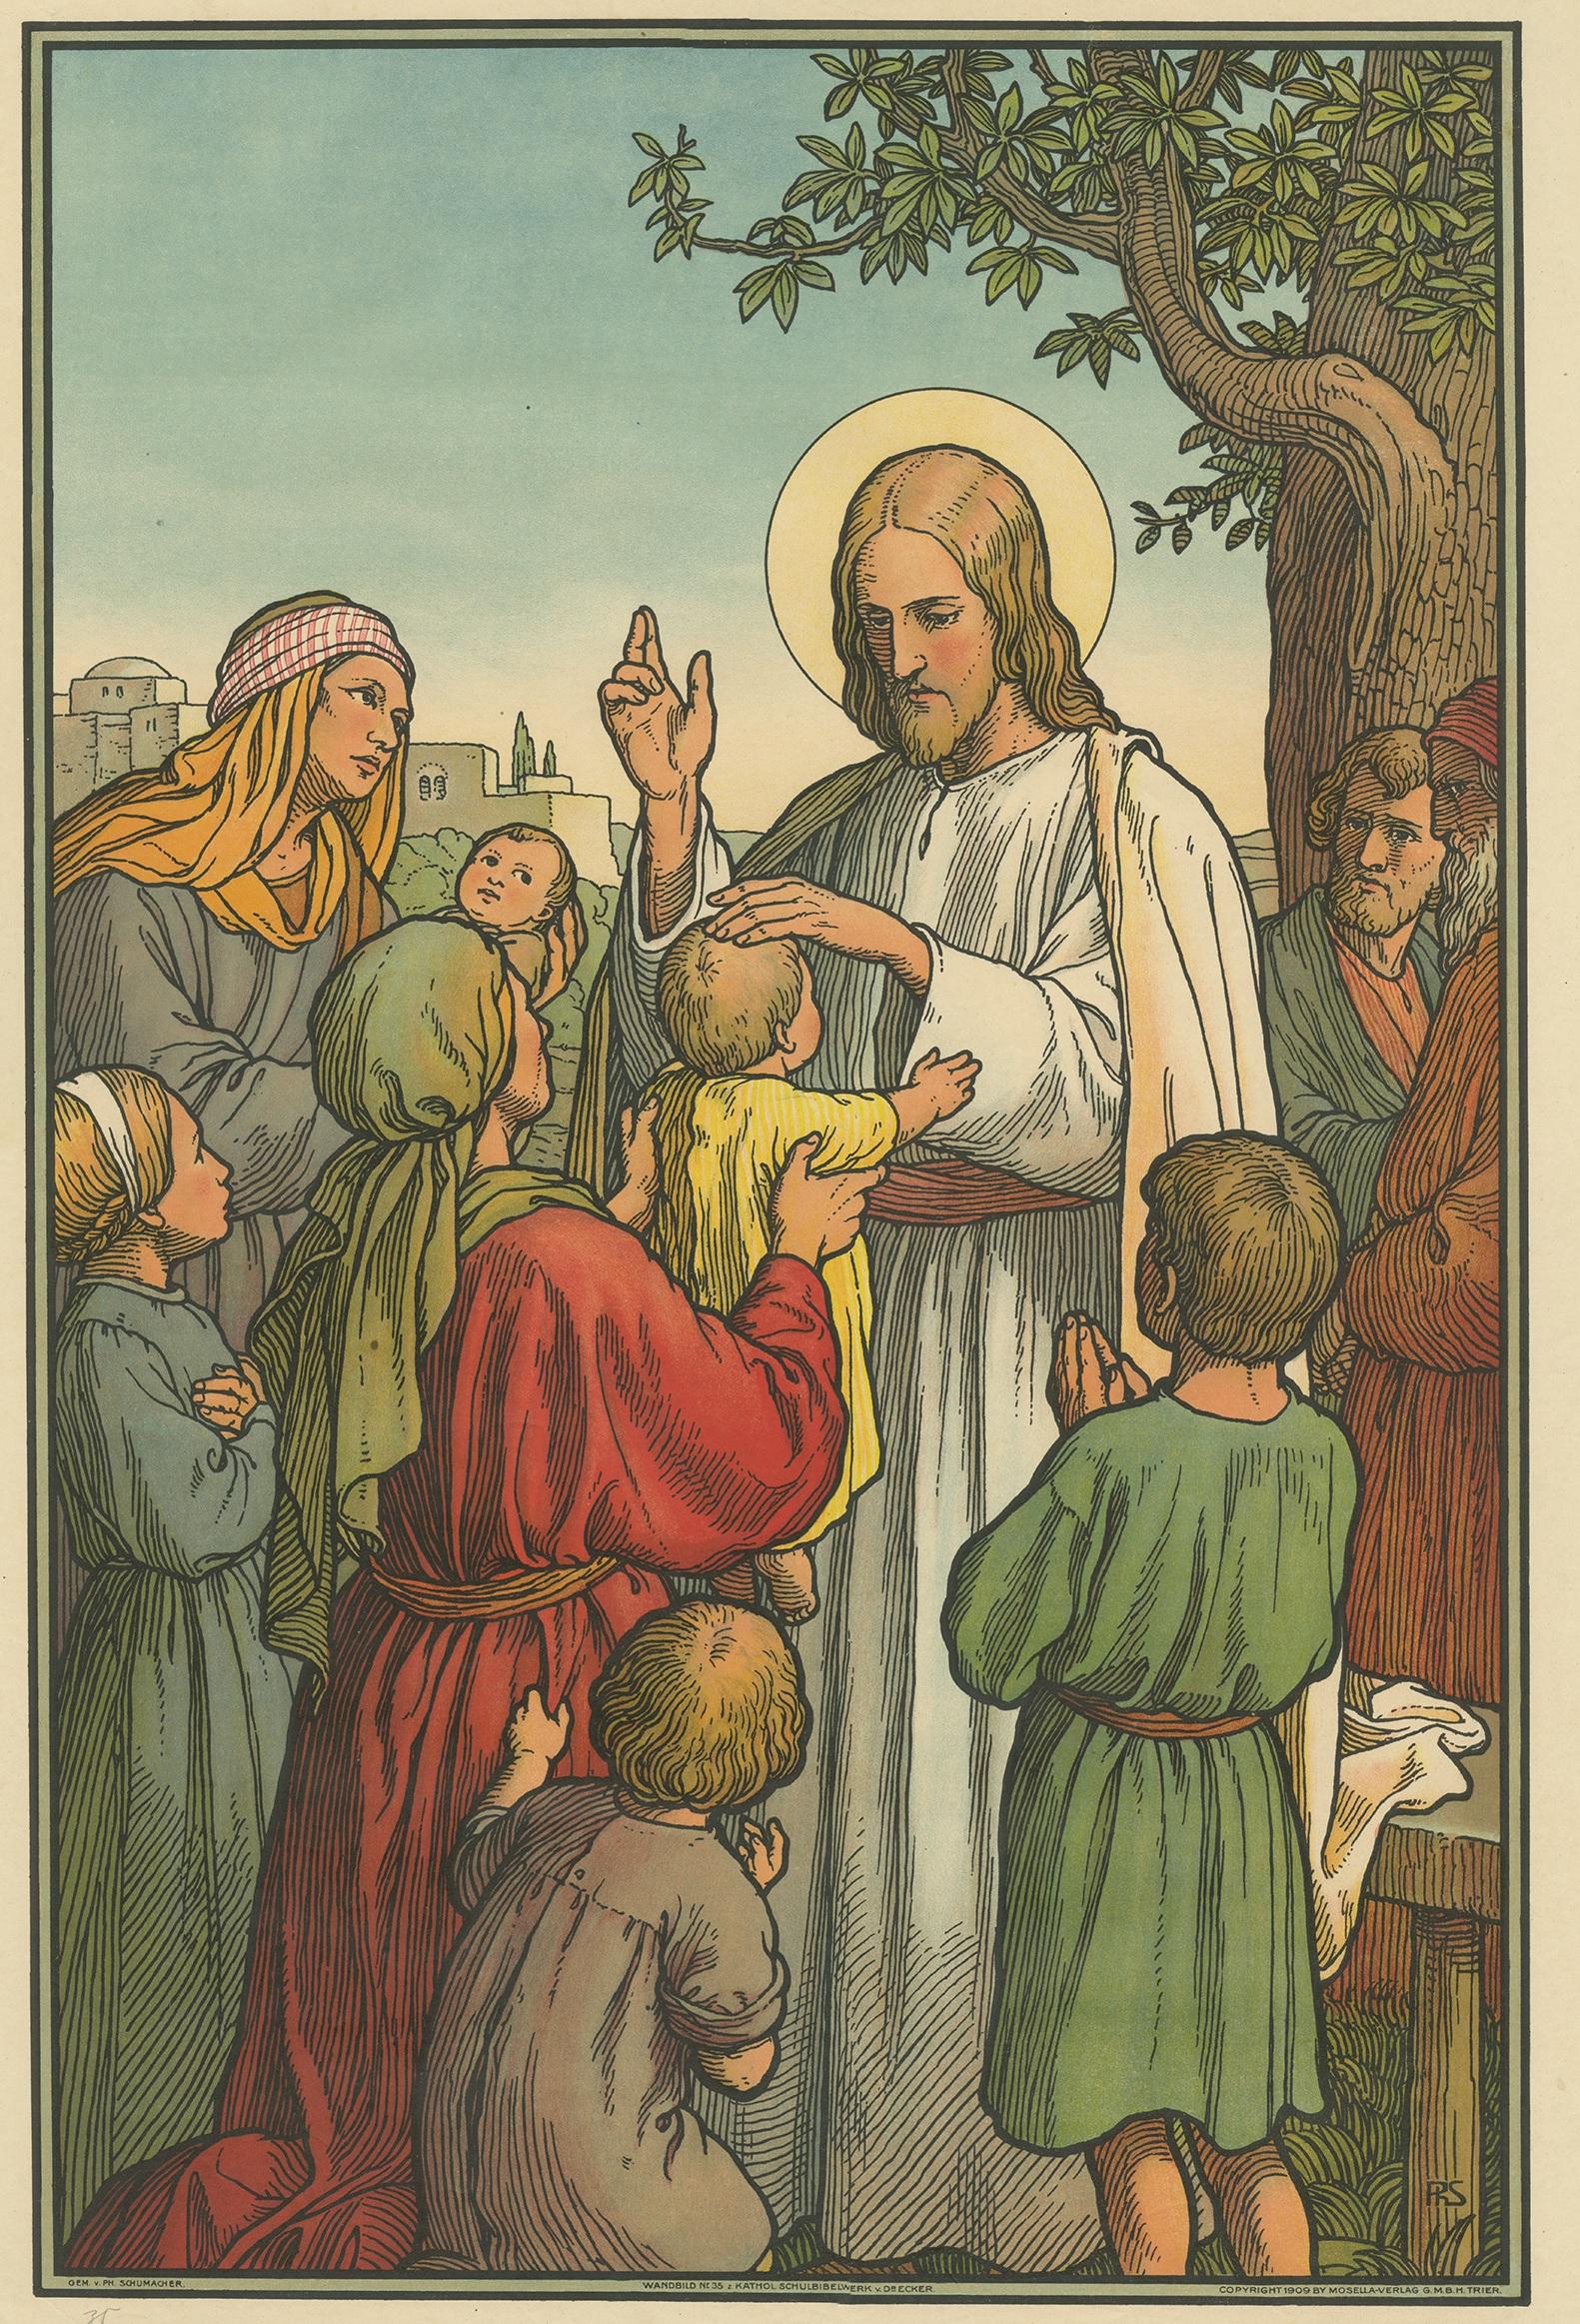 Large antique print of Christ blessing little children. Published by Mosella-Verlag, 1913. This print originates from a series titled 'Kathol. Schulbibelwerk von Dr. Ecker'.